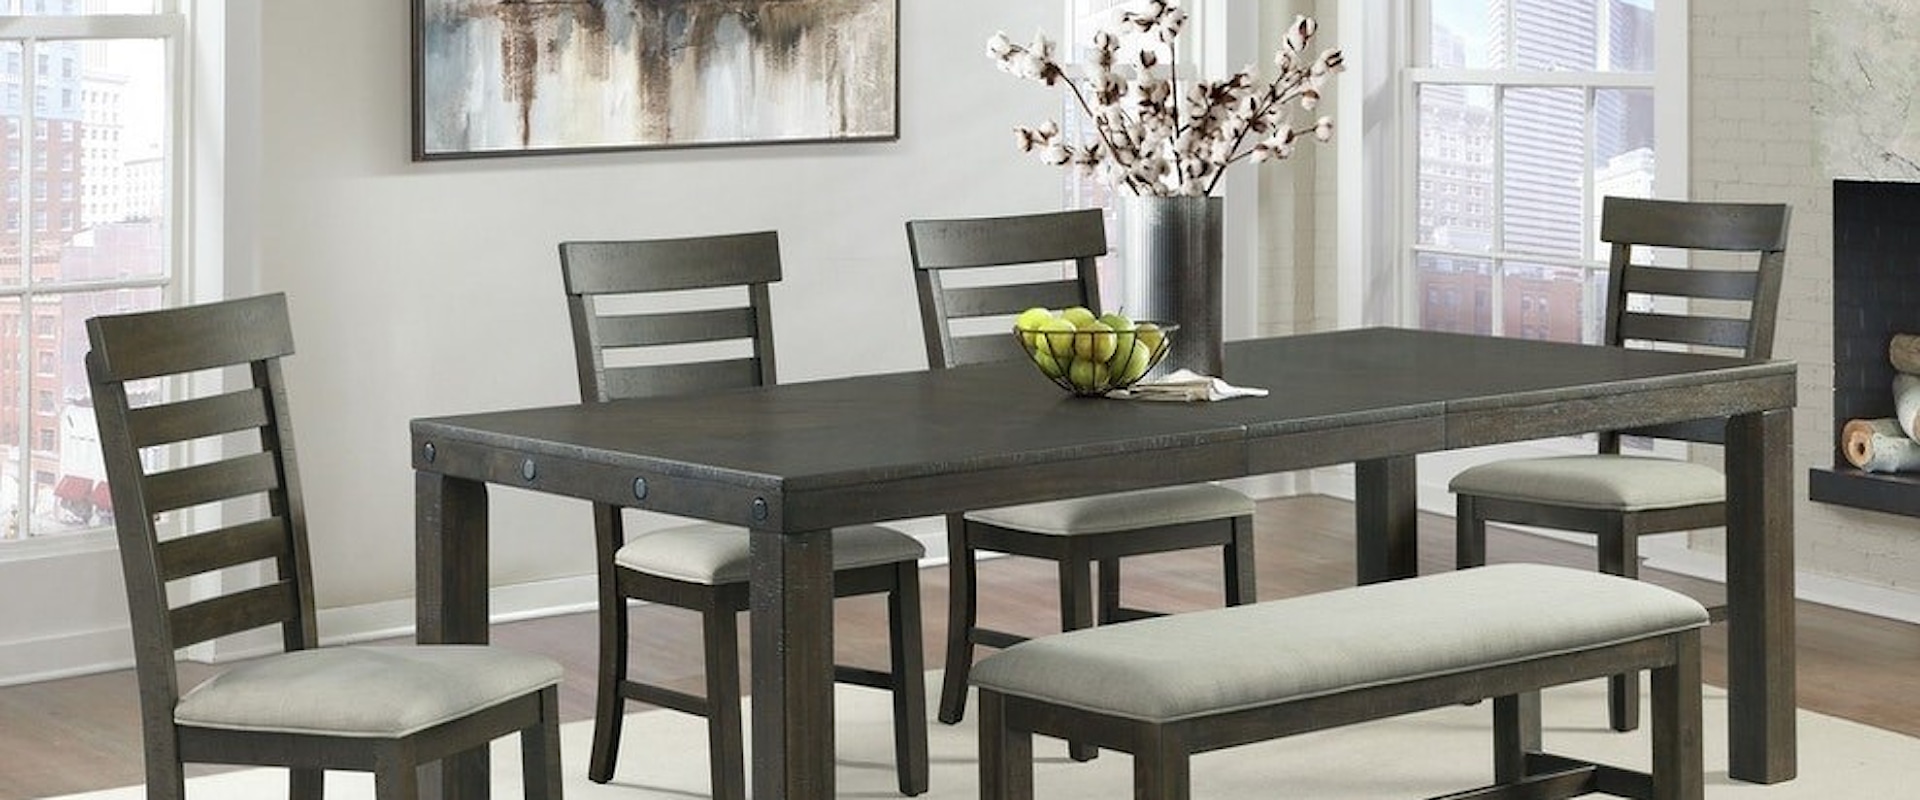 6-Piece Dining Table and Chair Set with Bench